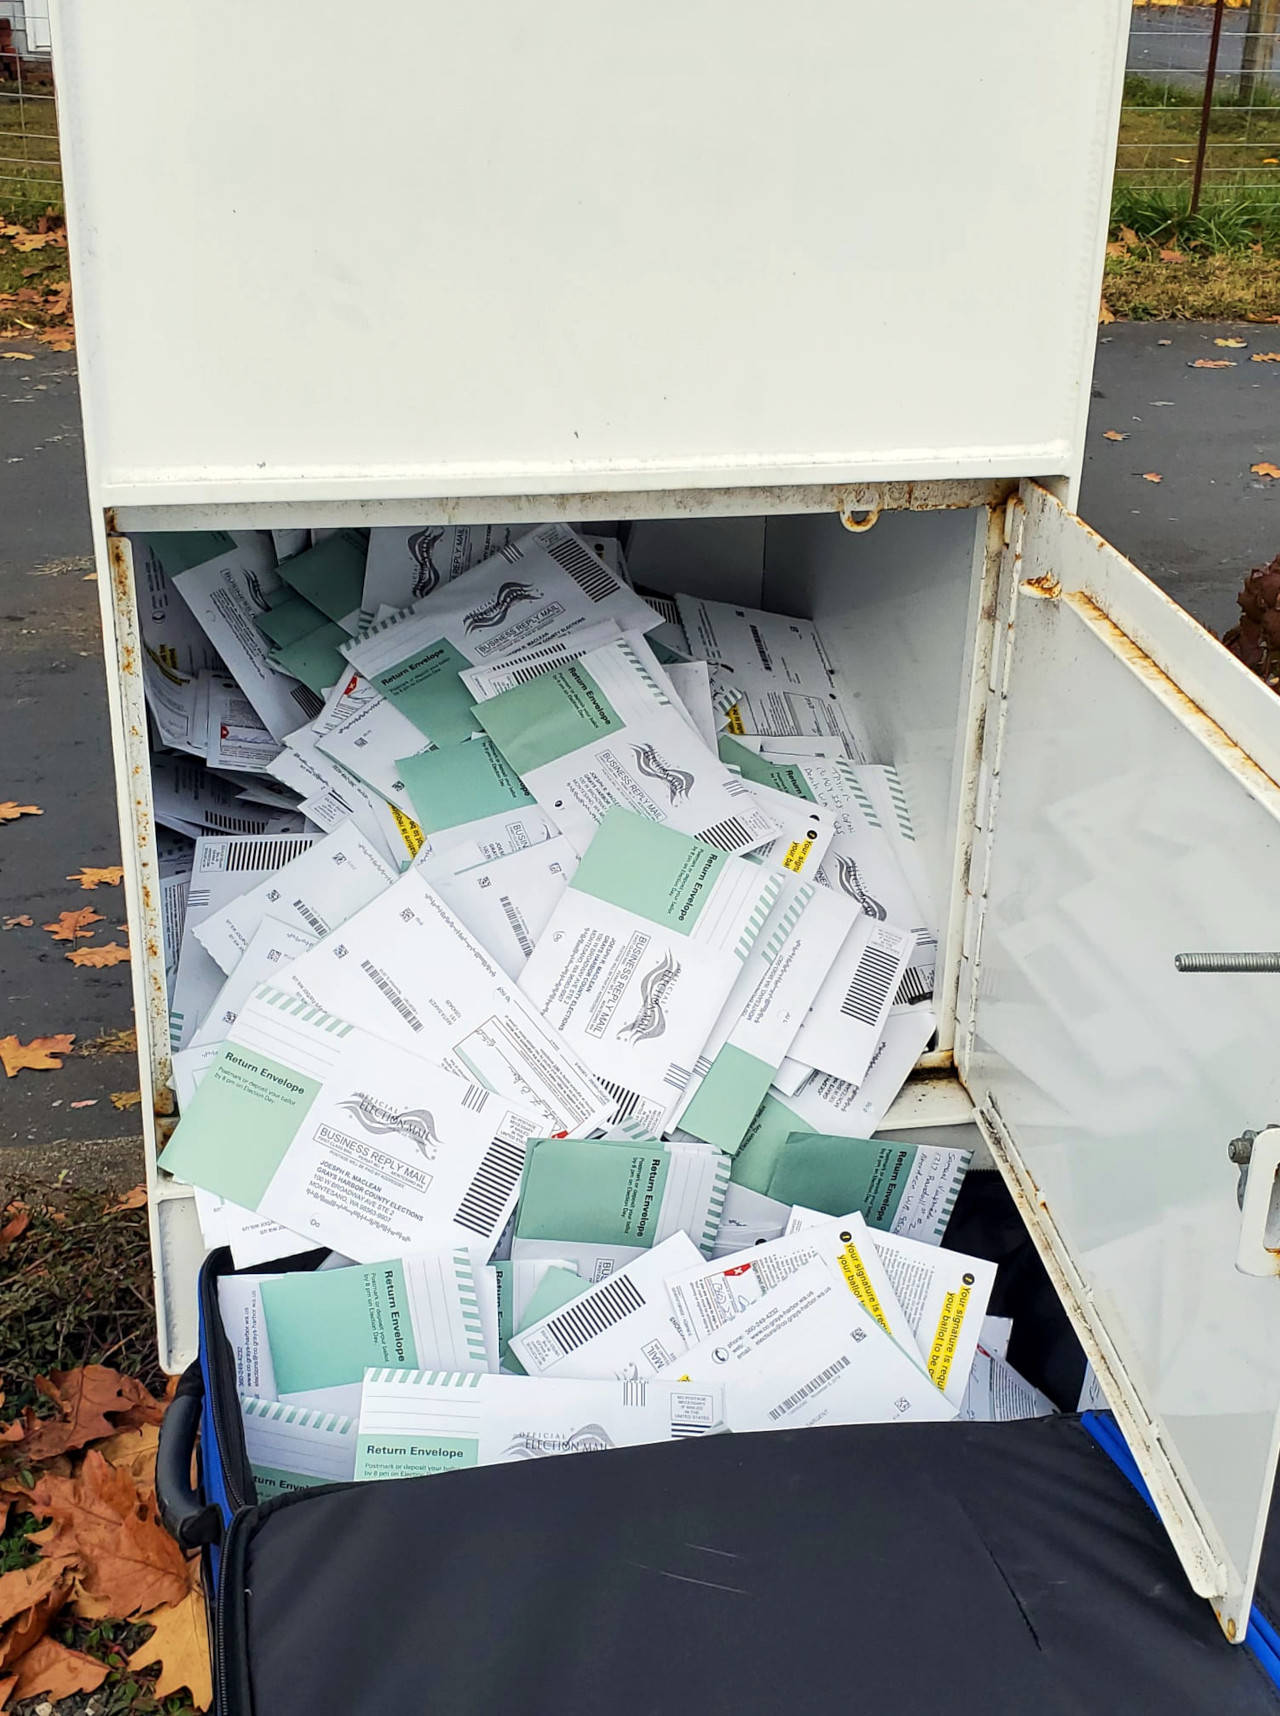 A drop-off ballot box in Hoquiam is filled with mail-in ballots in November 2019. (Photo courtesy of Grays Harbor County Auditor’s Office)